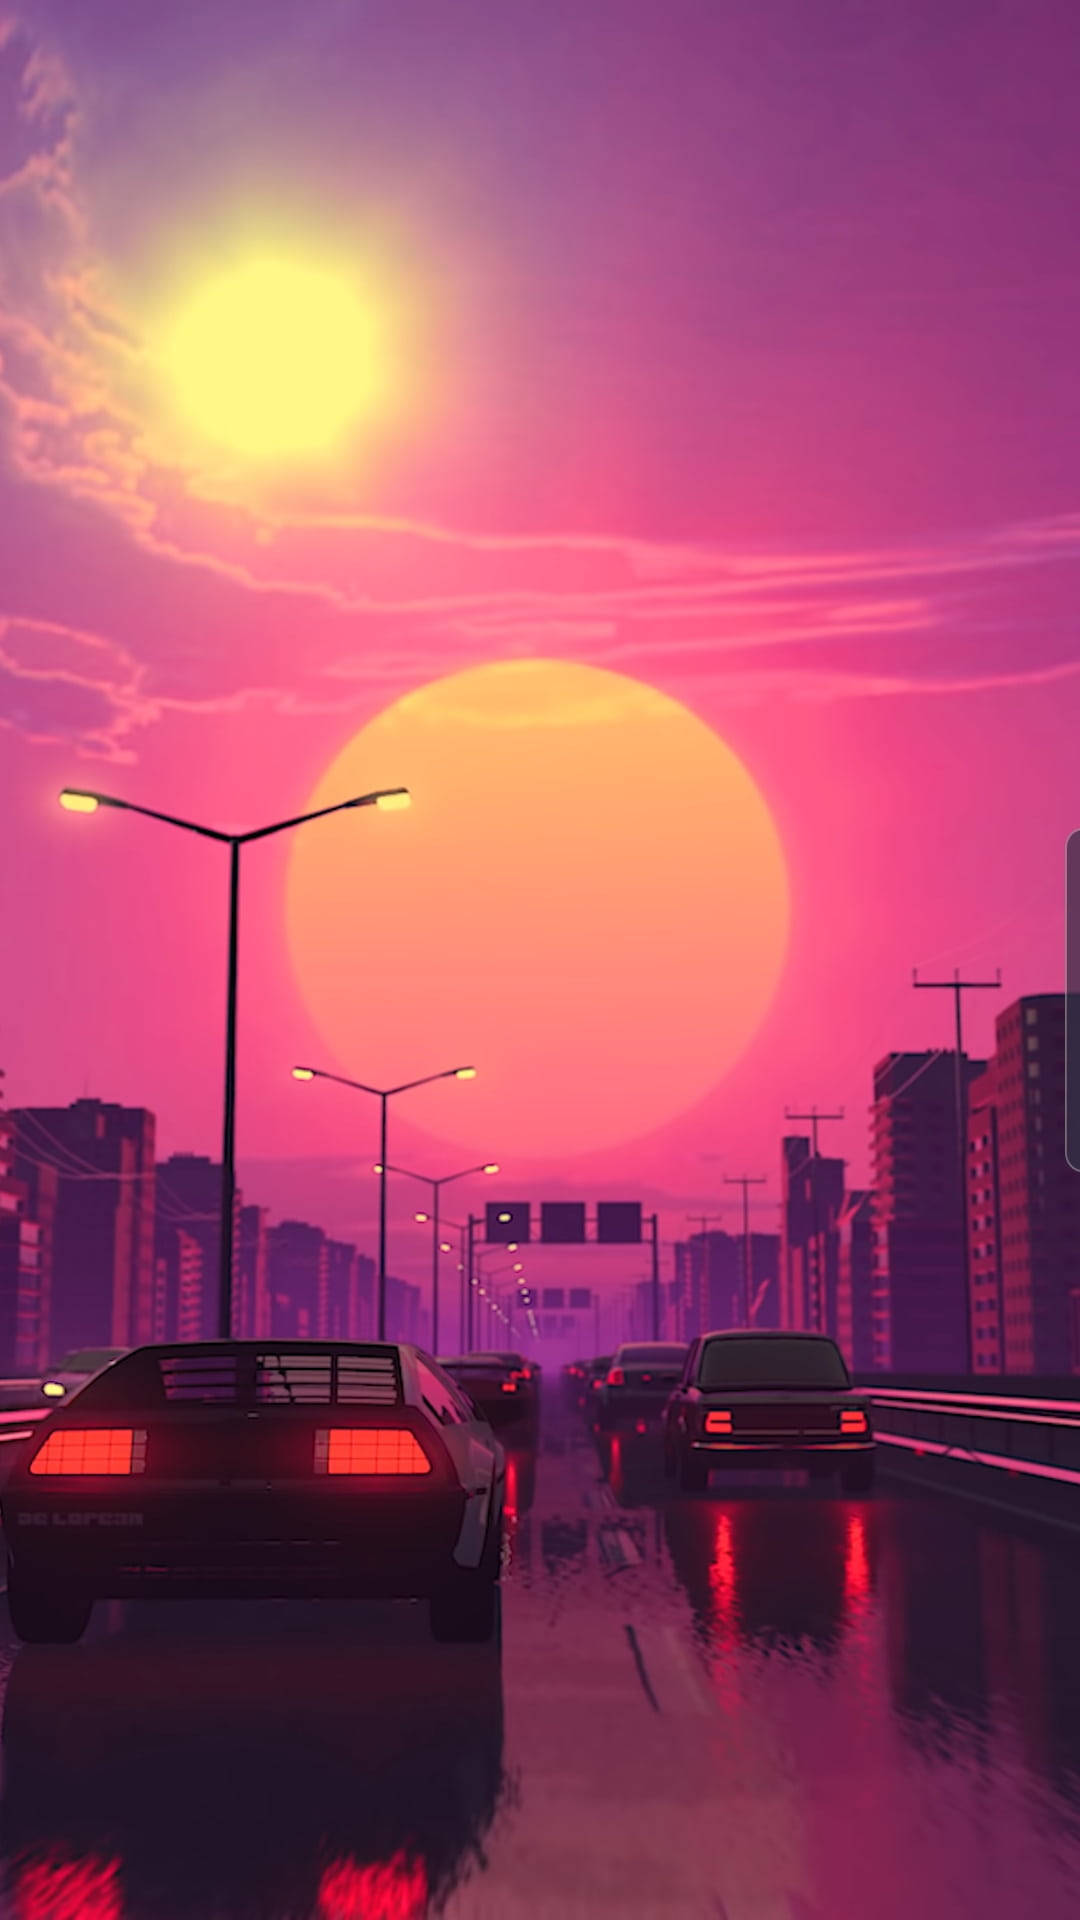 Purple Aesthetic Sunset With Cars